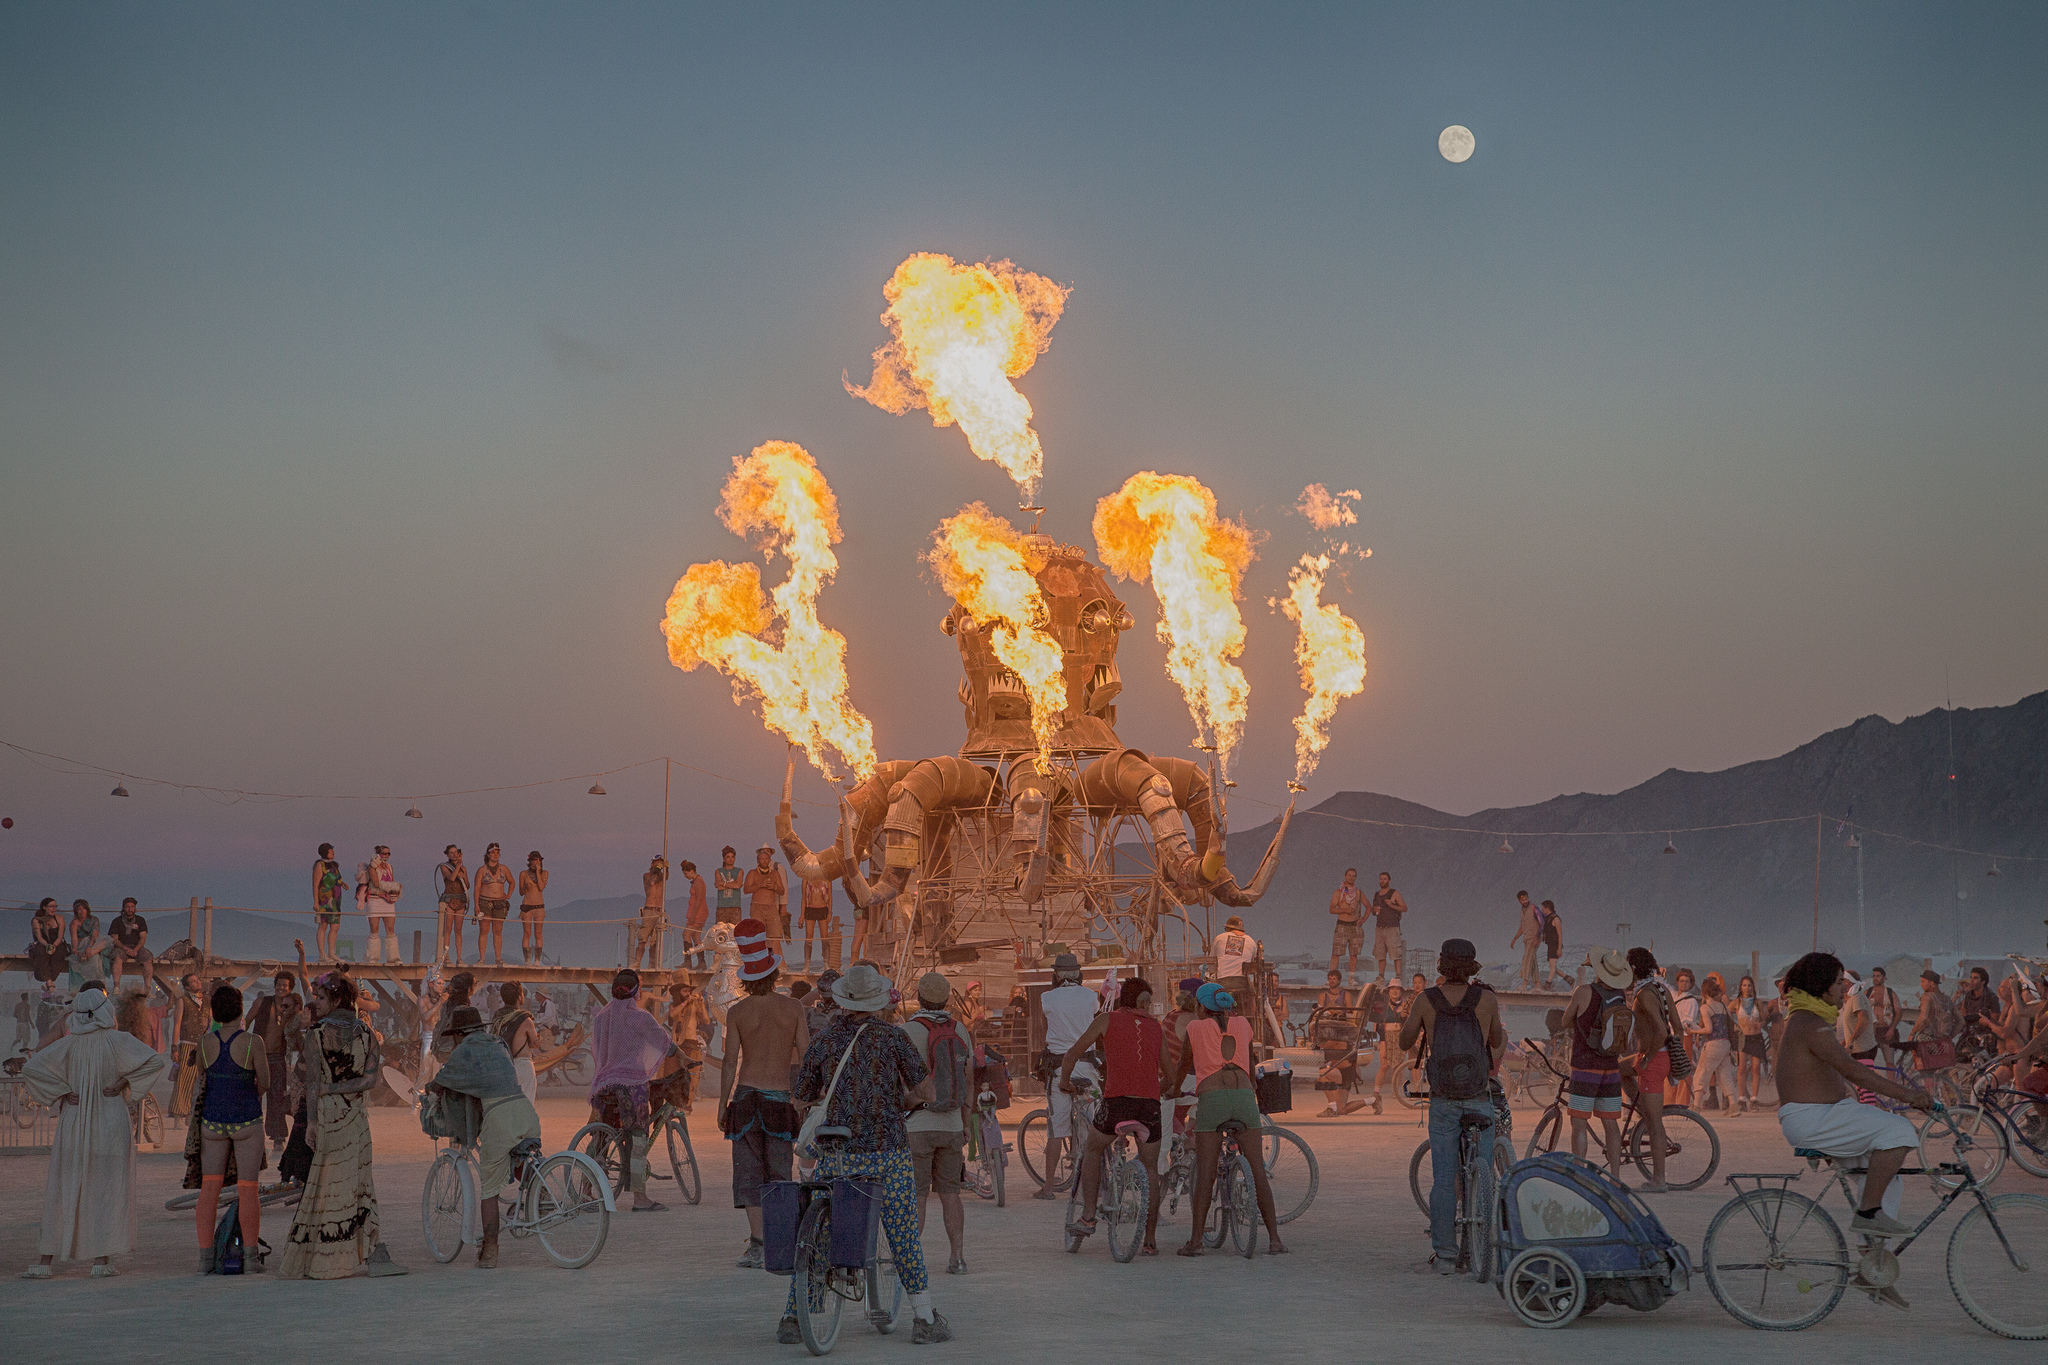 Climate Change Activists Took Over: Chaos At Burning Man